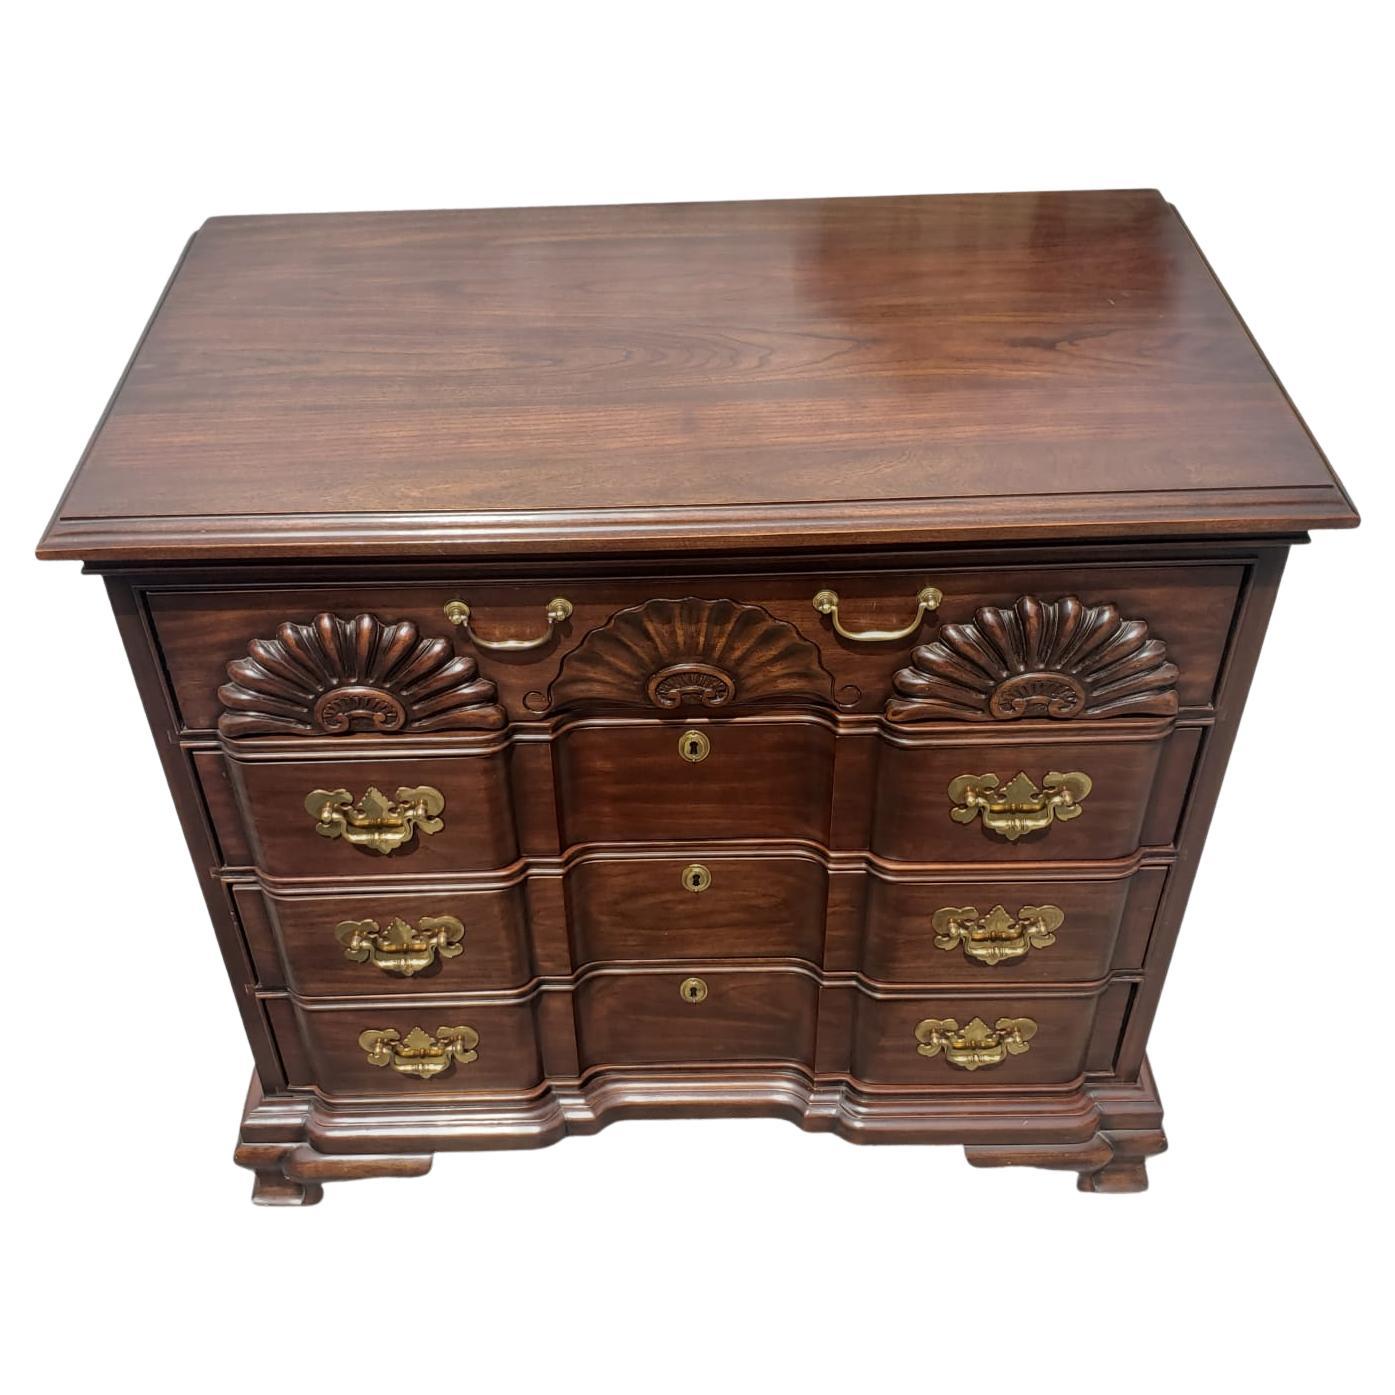 A stunning 1960s harden block front mahogany georgian chest of drawers in excellent condition. This state-of-the-art piece was last sold in 1989 as a vintage, according to a sticker that was stapled underneath it. However it is Hard to tell giving